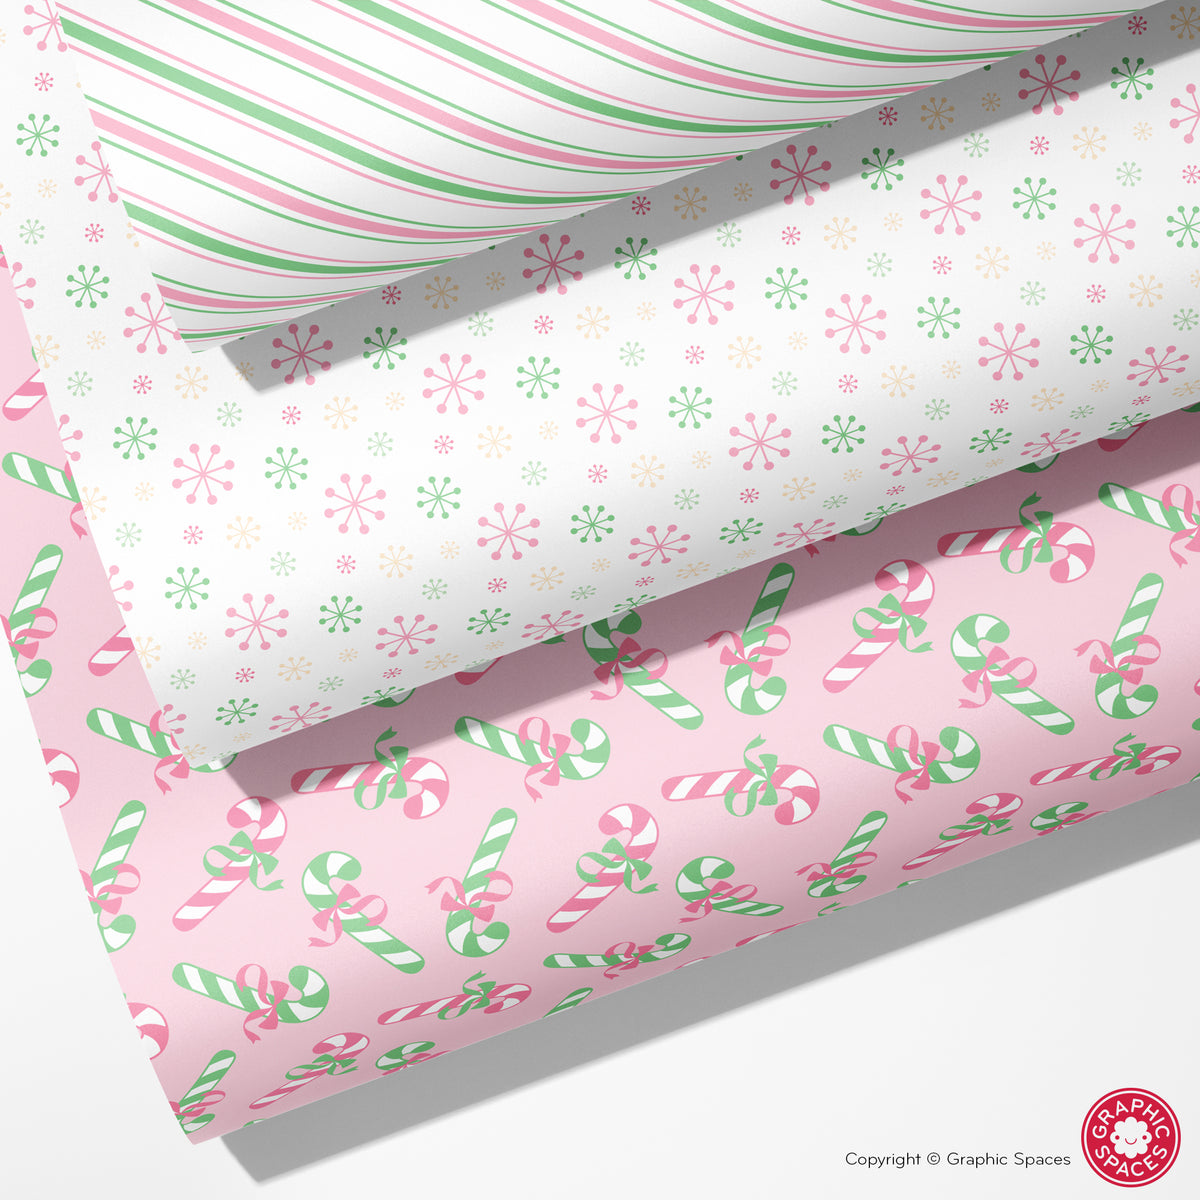 Set of 3 Assorted Christmas Wrapping Papers - PASTEL